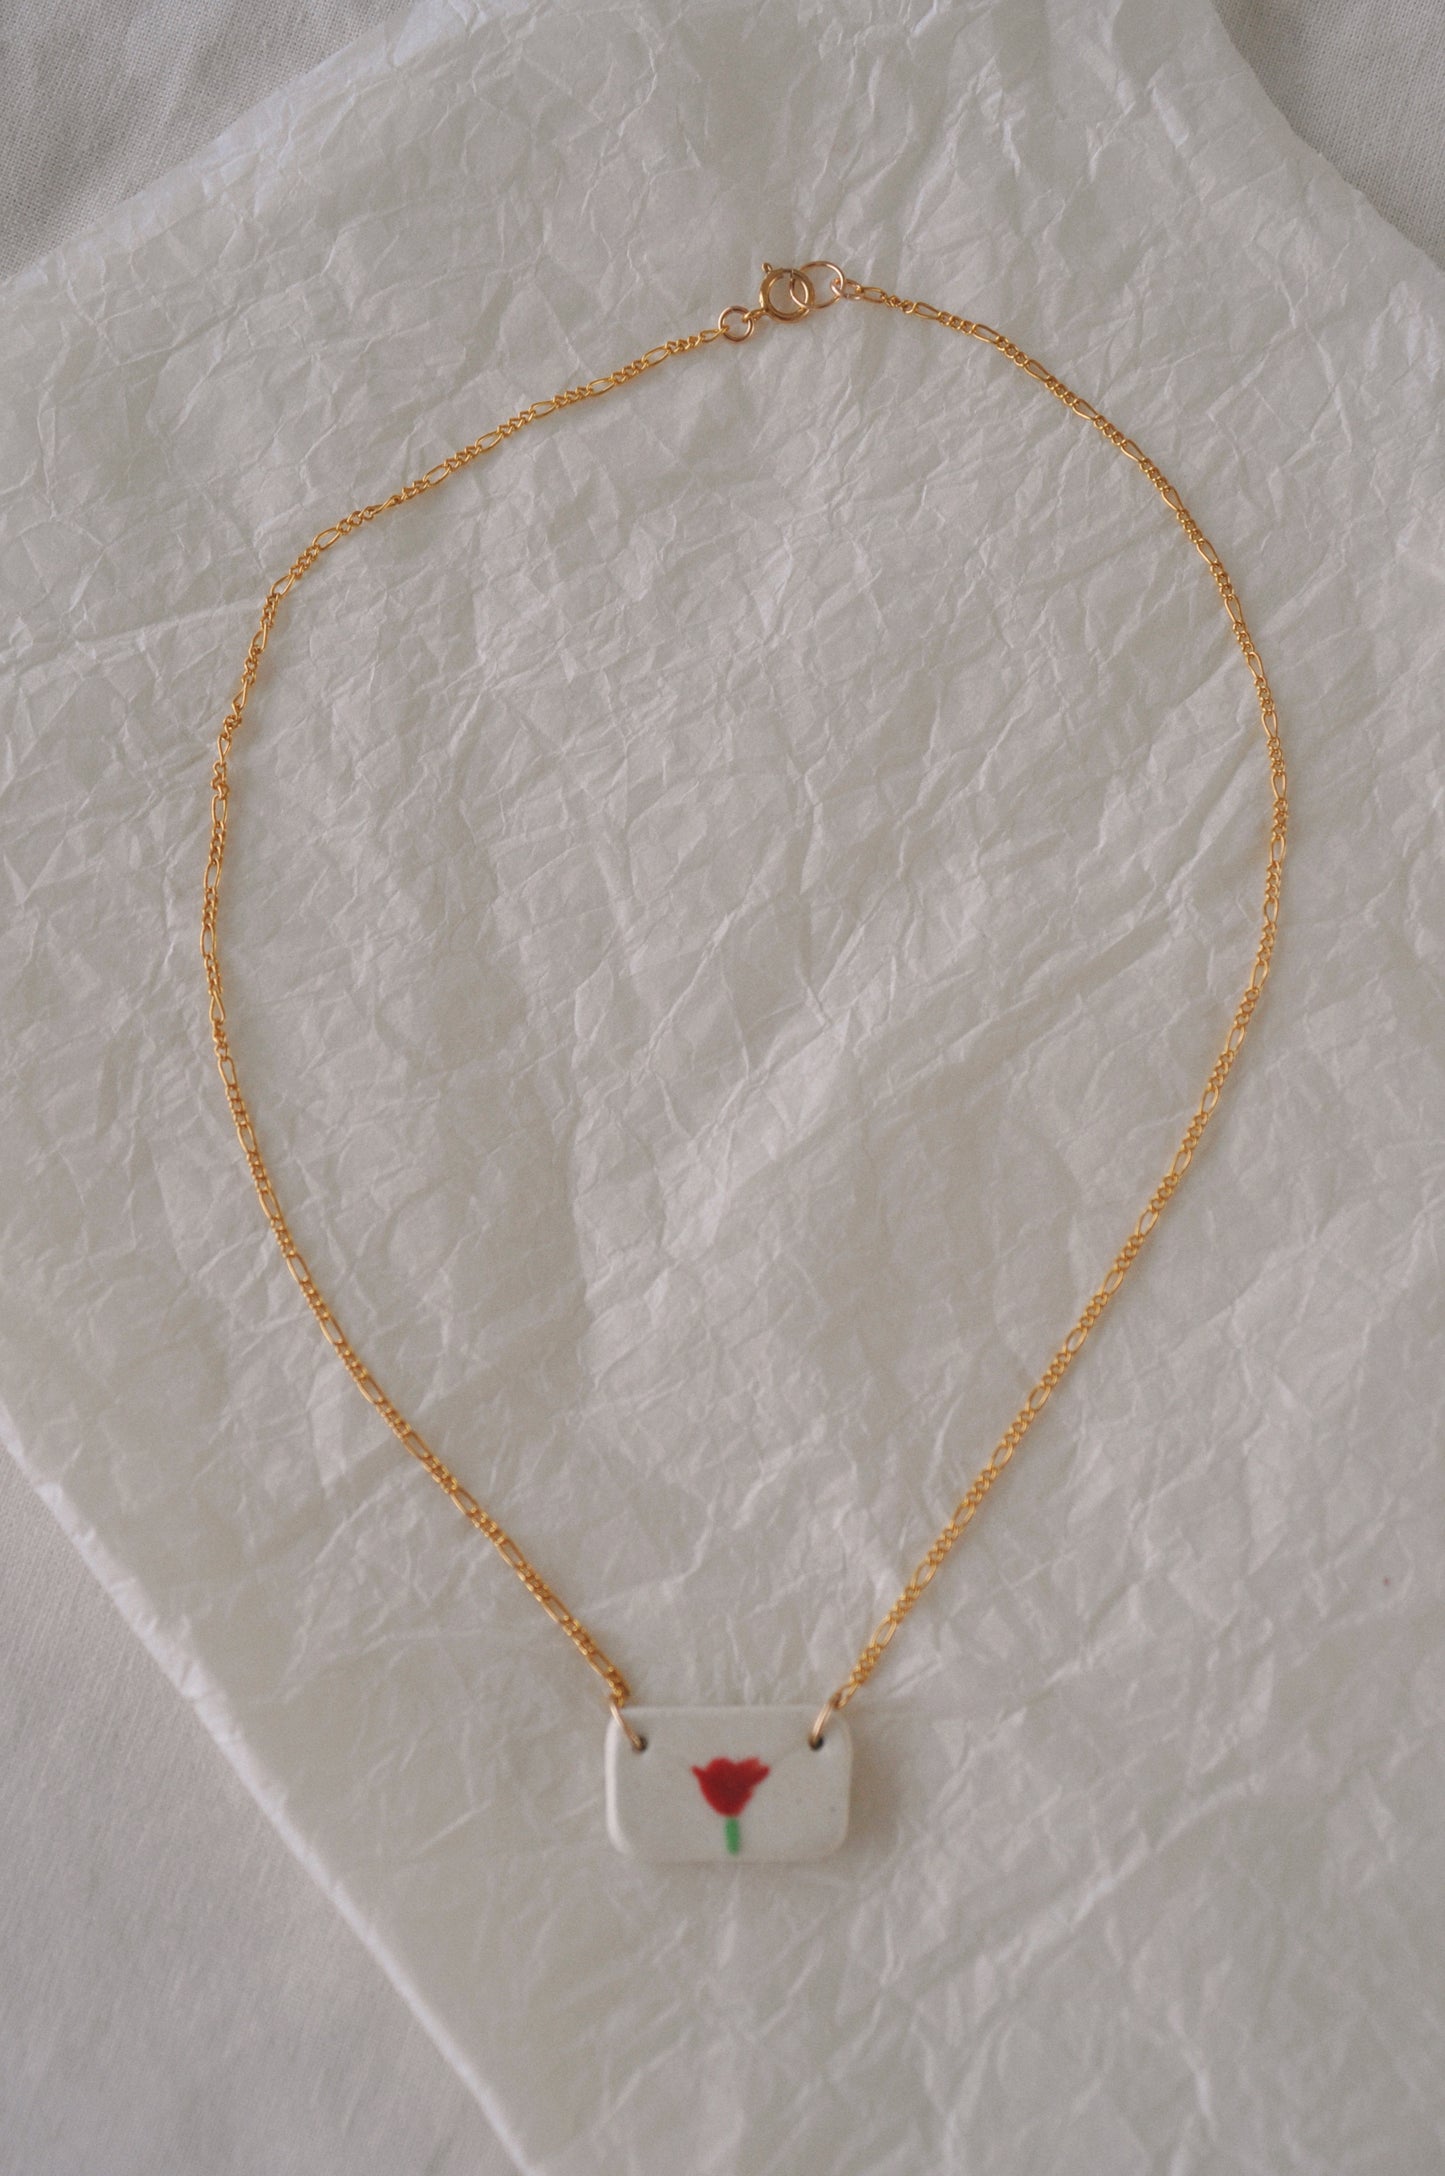 Solo amor - Collier